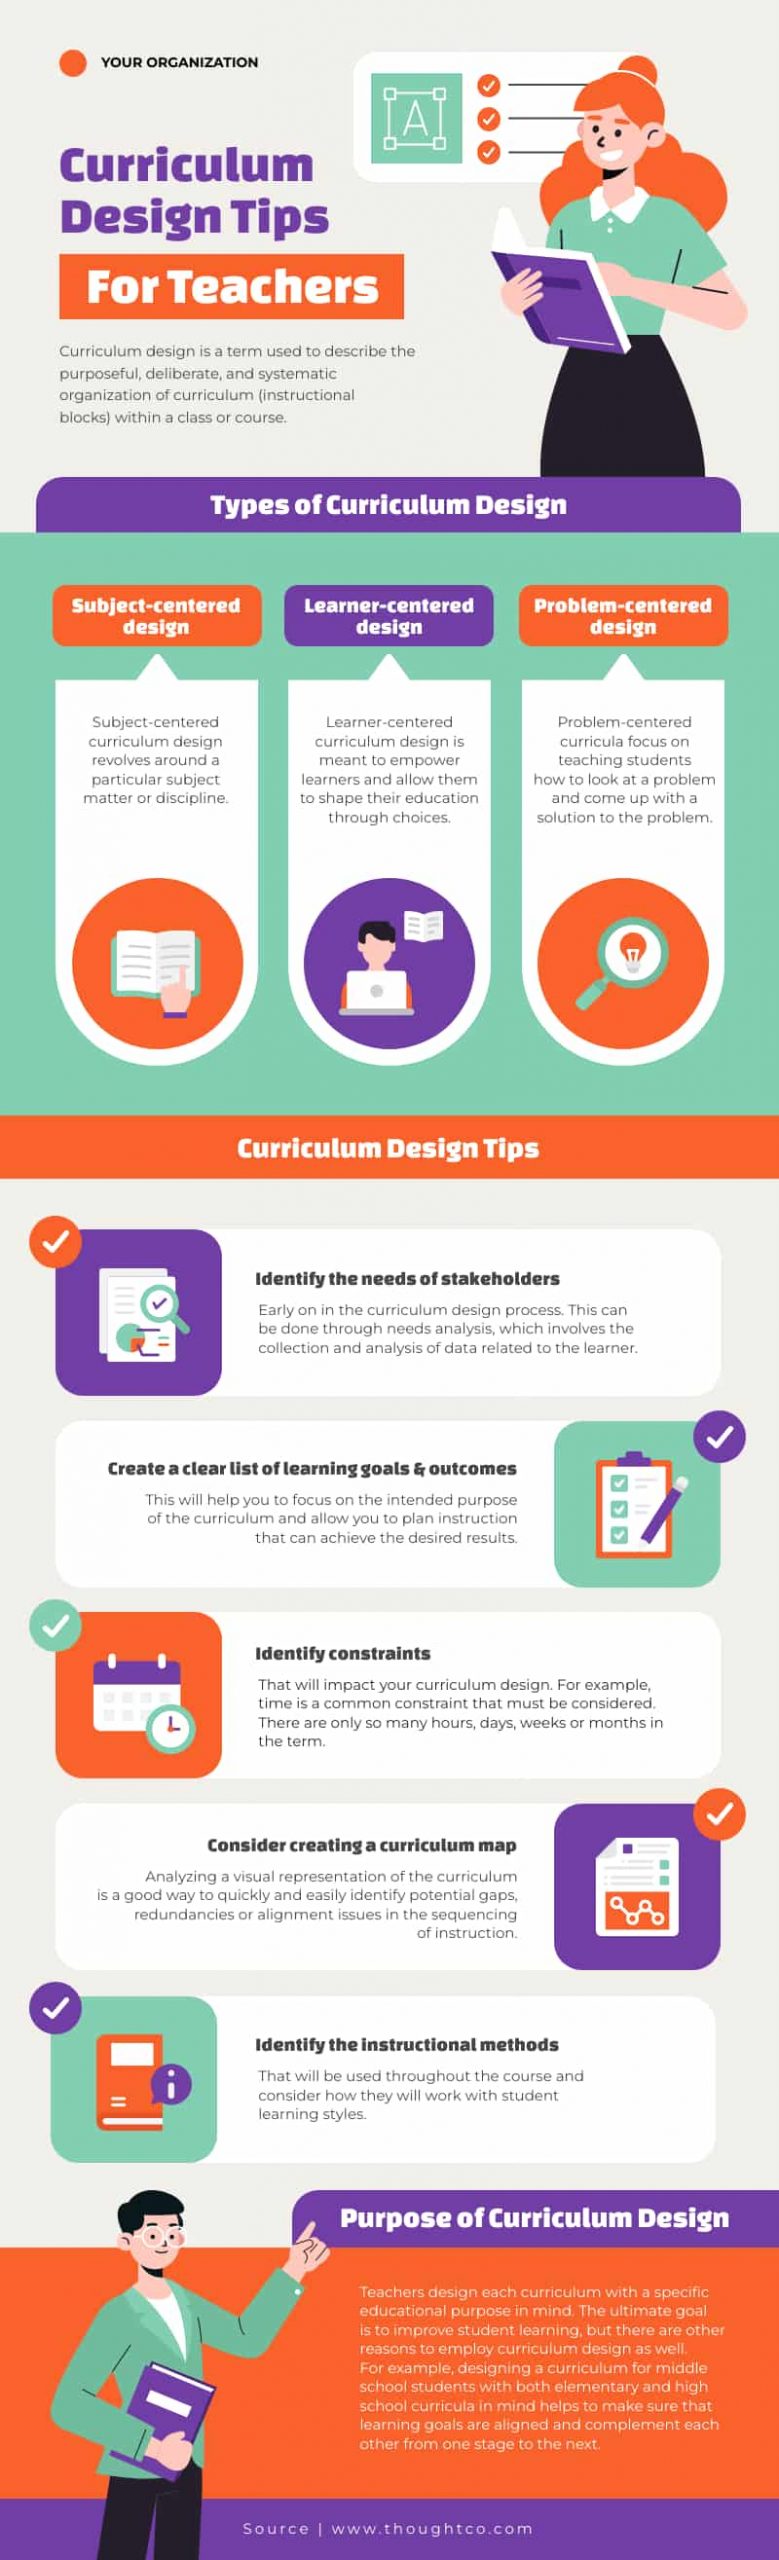 an infographic poster template about curriculum design tips for teachers